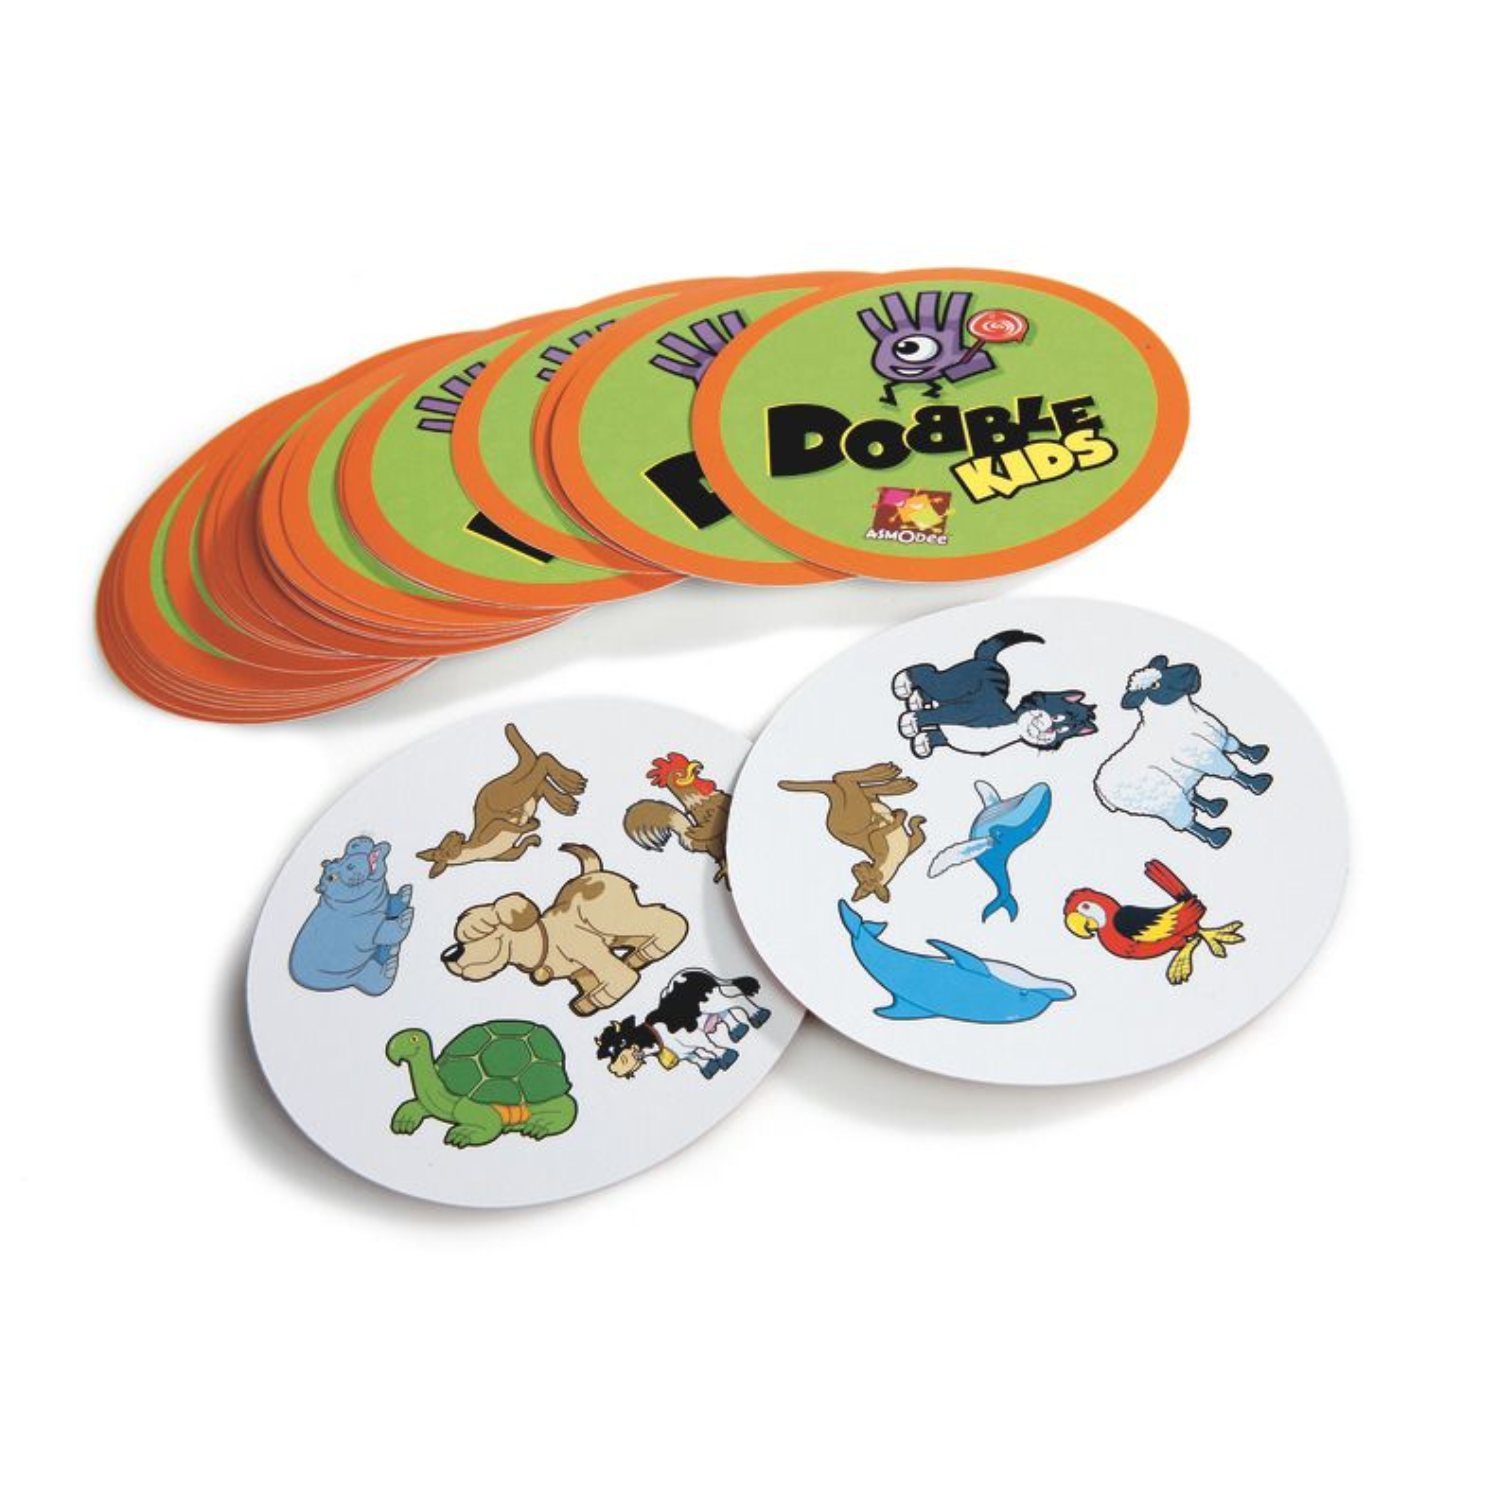 APPYTOYS  ASMODEE - Dobble Kids - A Fun & Fast-Paced Card Game